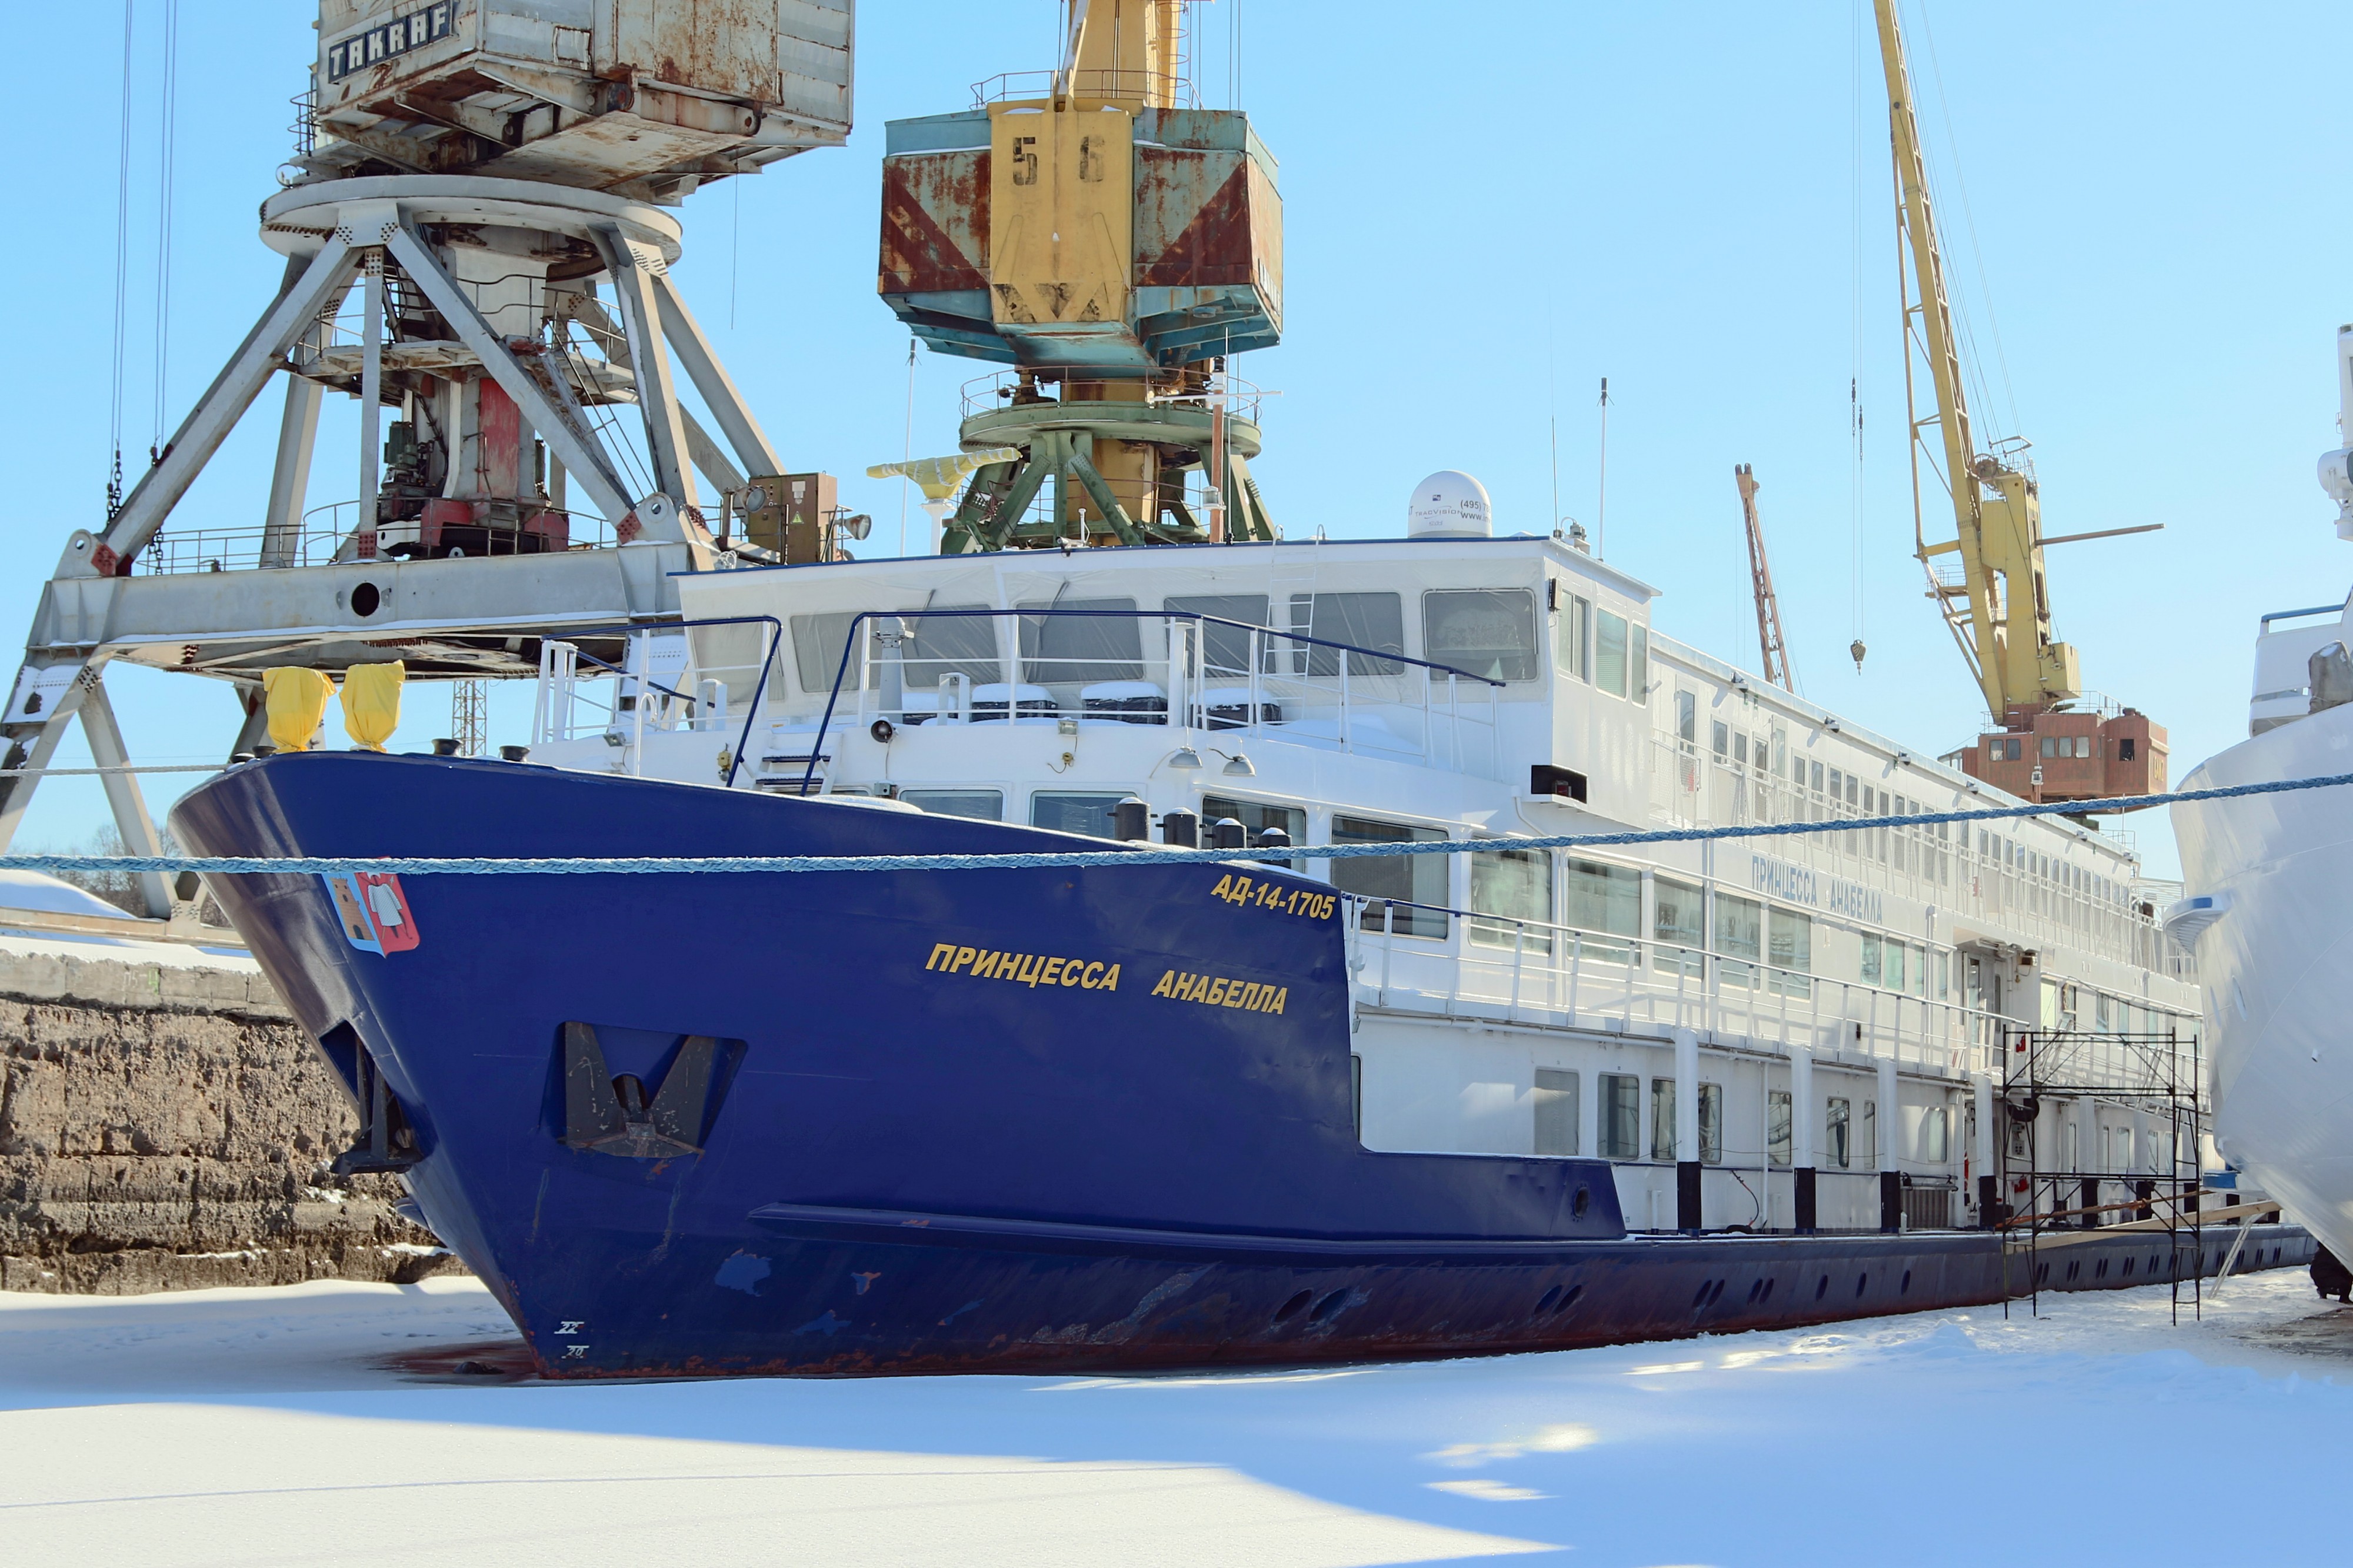 Printsessa Anabella in Winter at Moscow North River Port 10-feb-2015